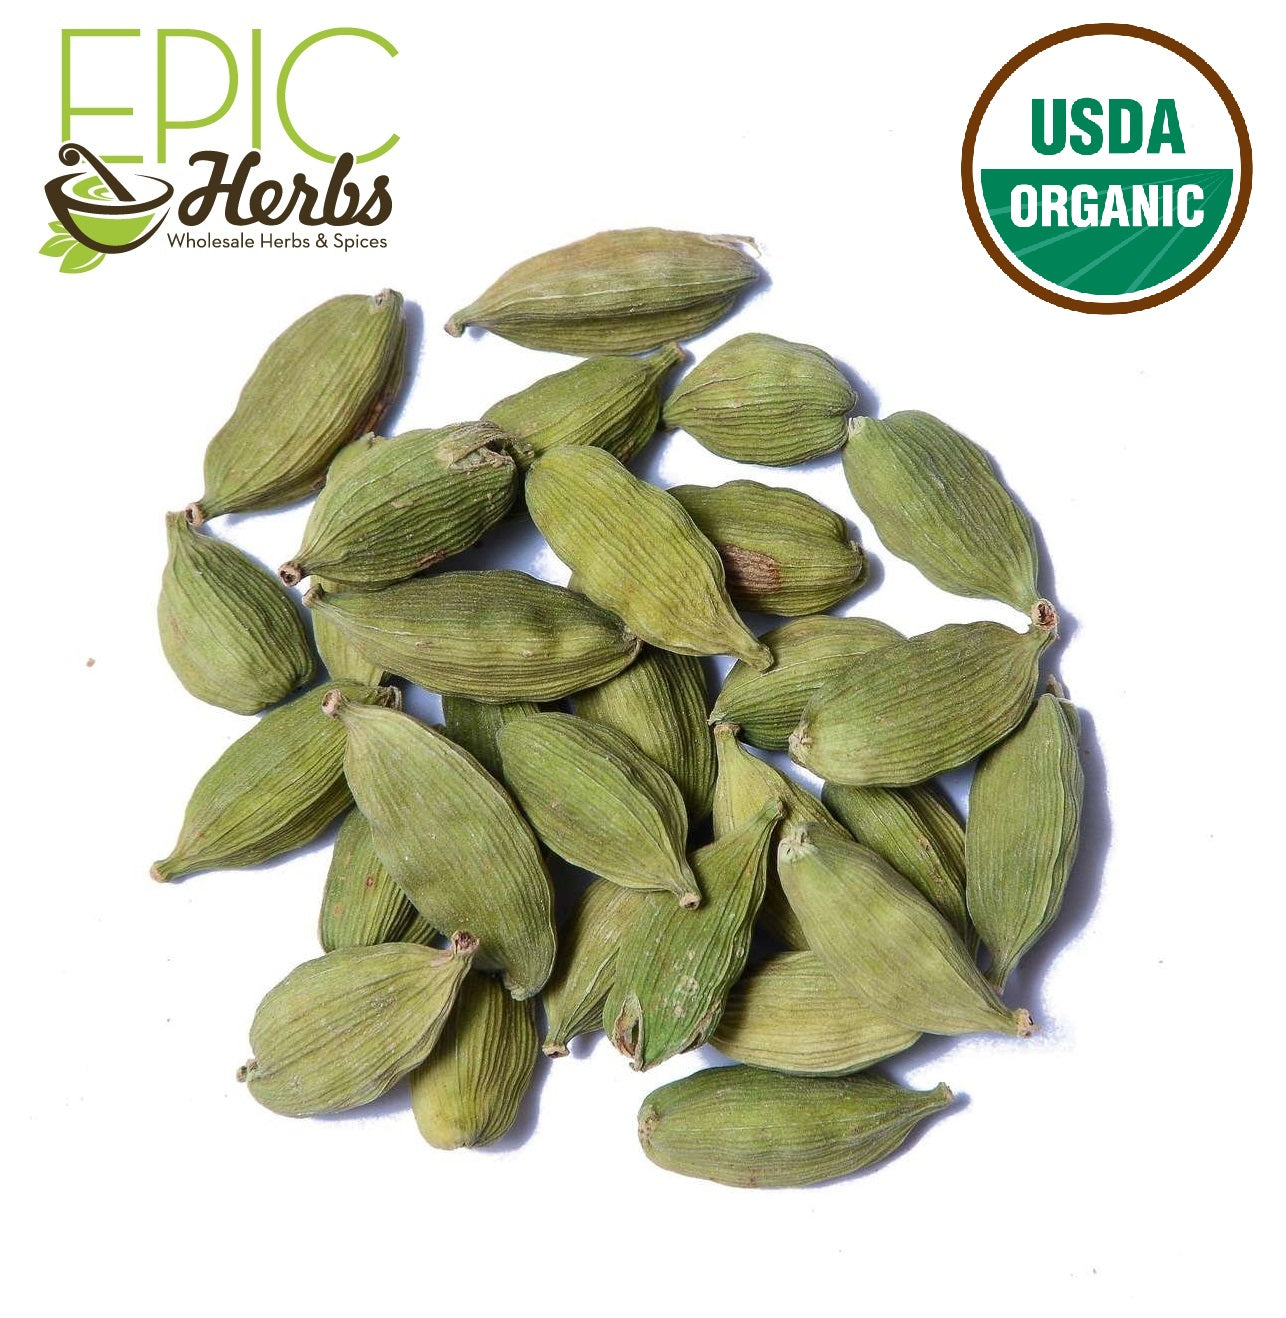 Cardamom Pods Whole, Green, Certified Organic - 1 lb